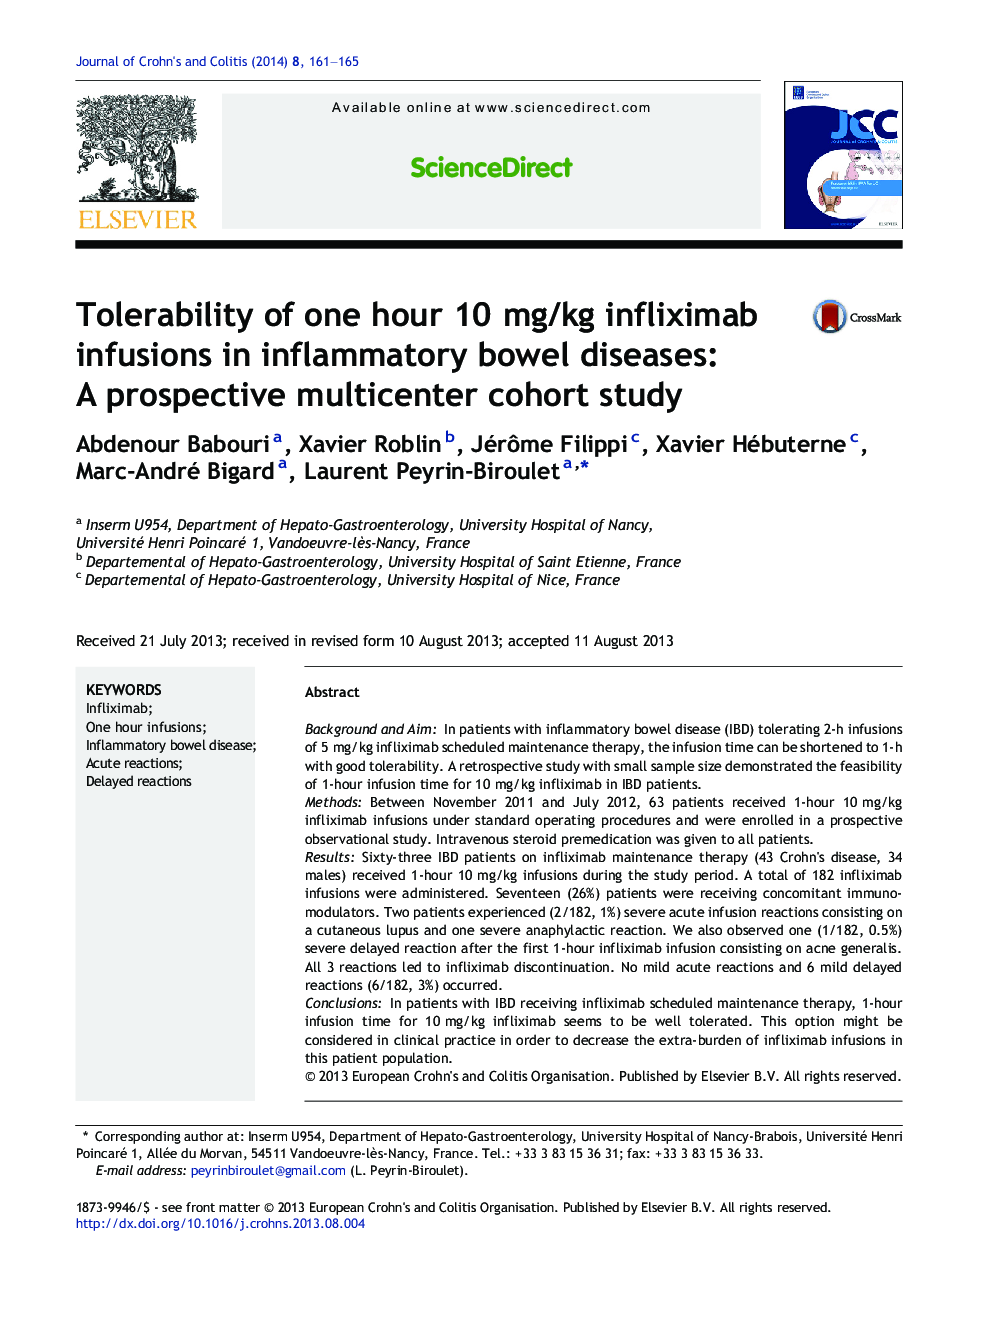 Tolerability of one hour 10Â mg/kg infliximab infusions in inflammatory bowel diseases: A prospective multicenter cohort study